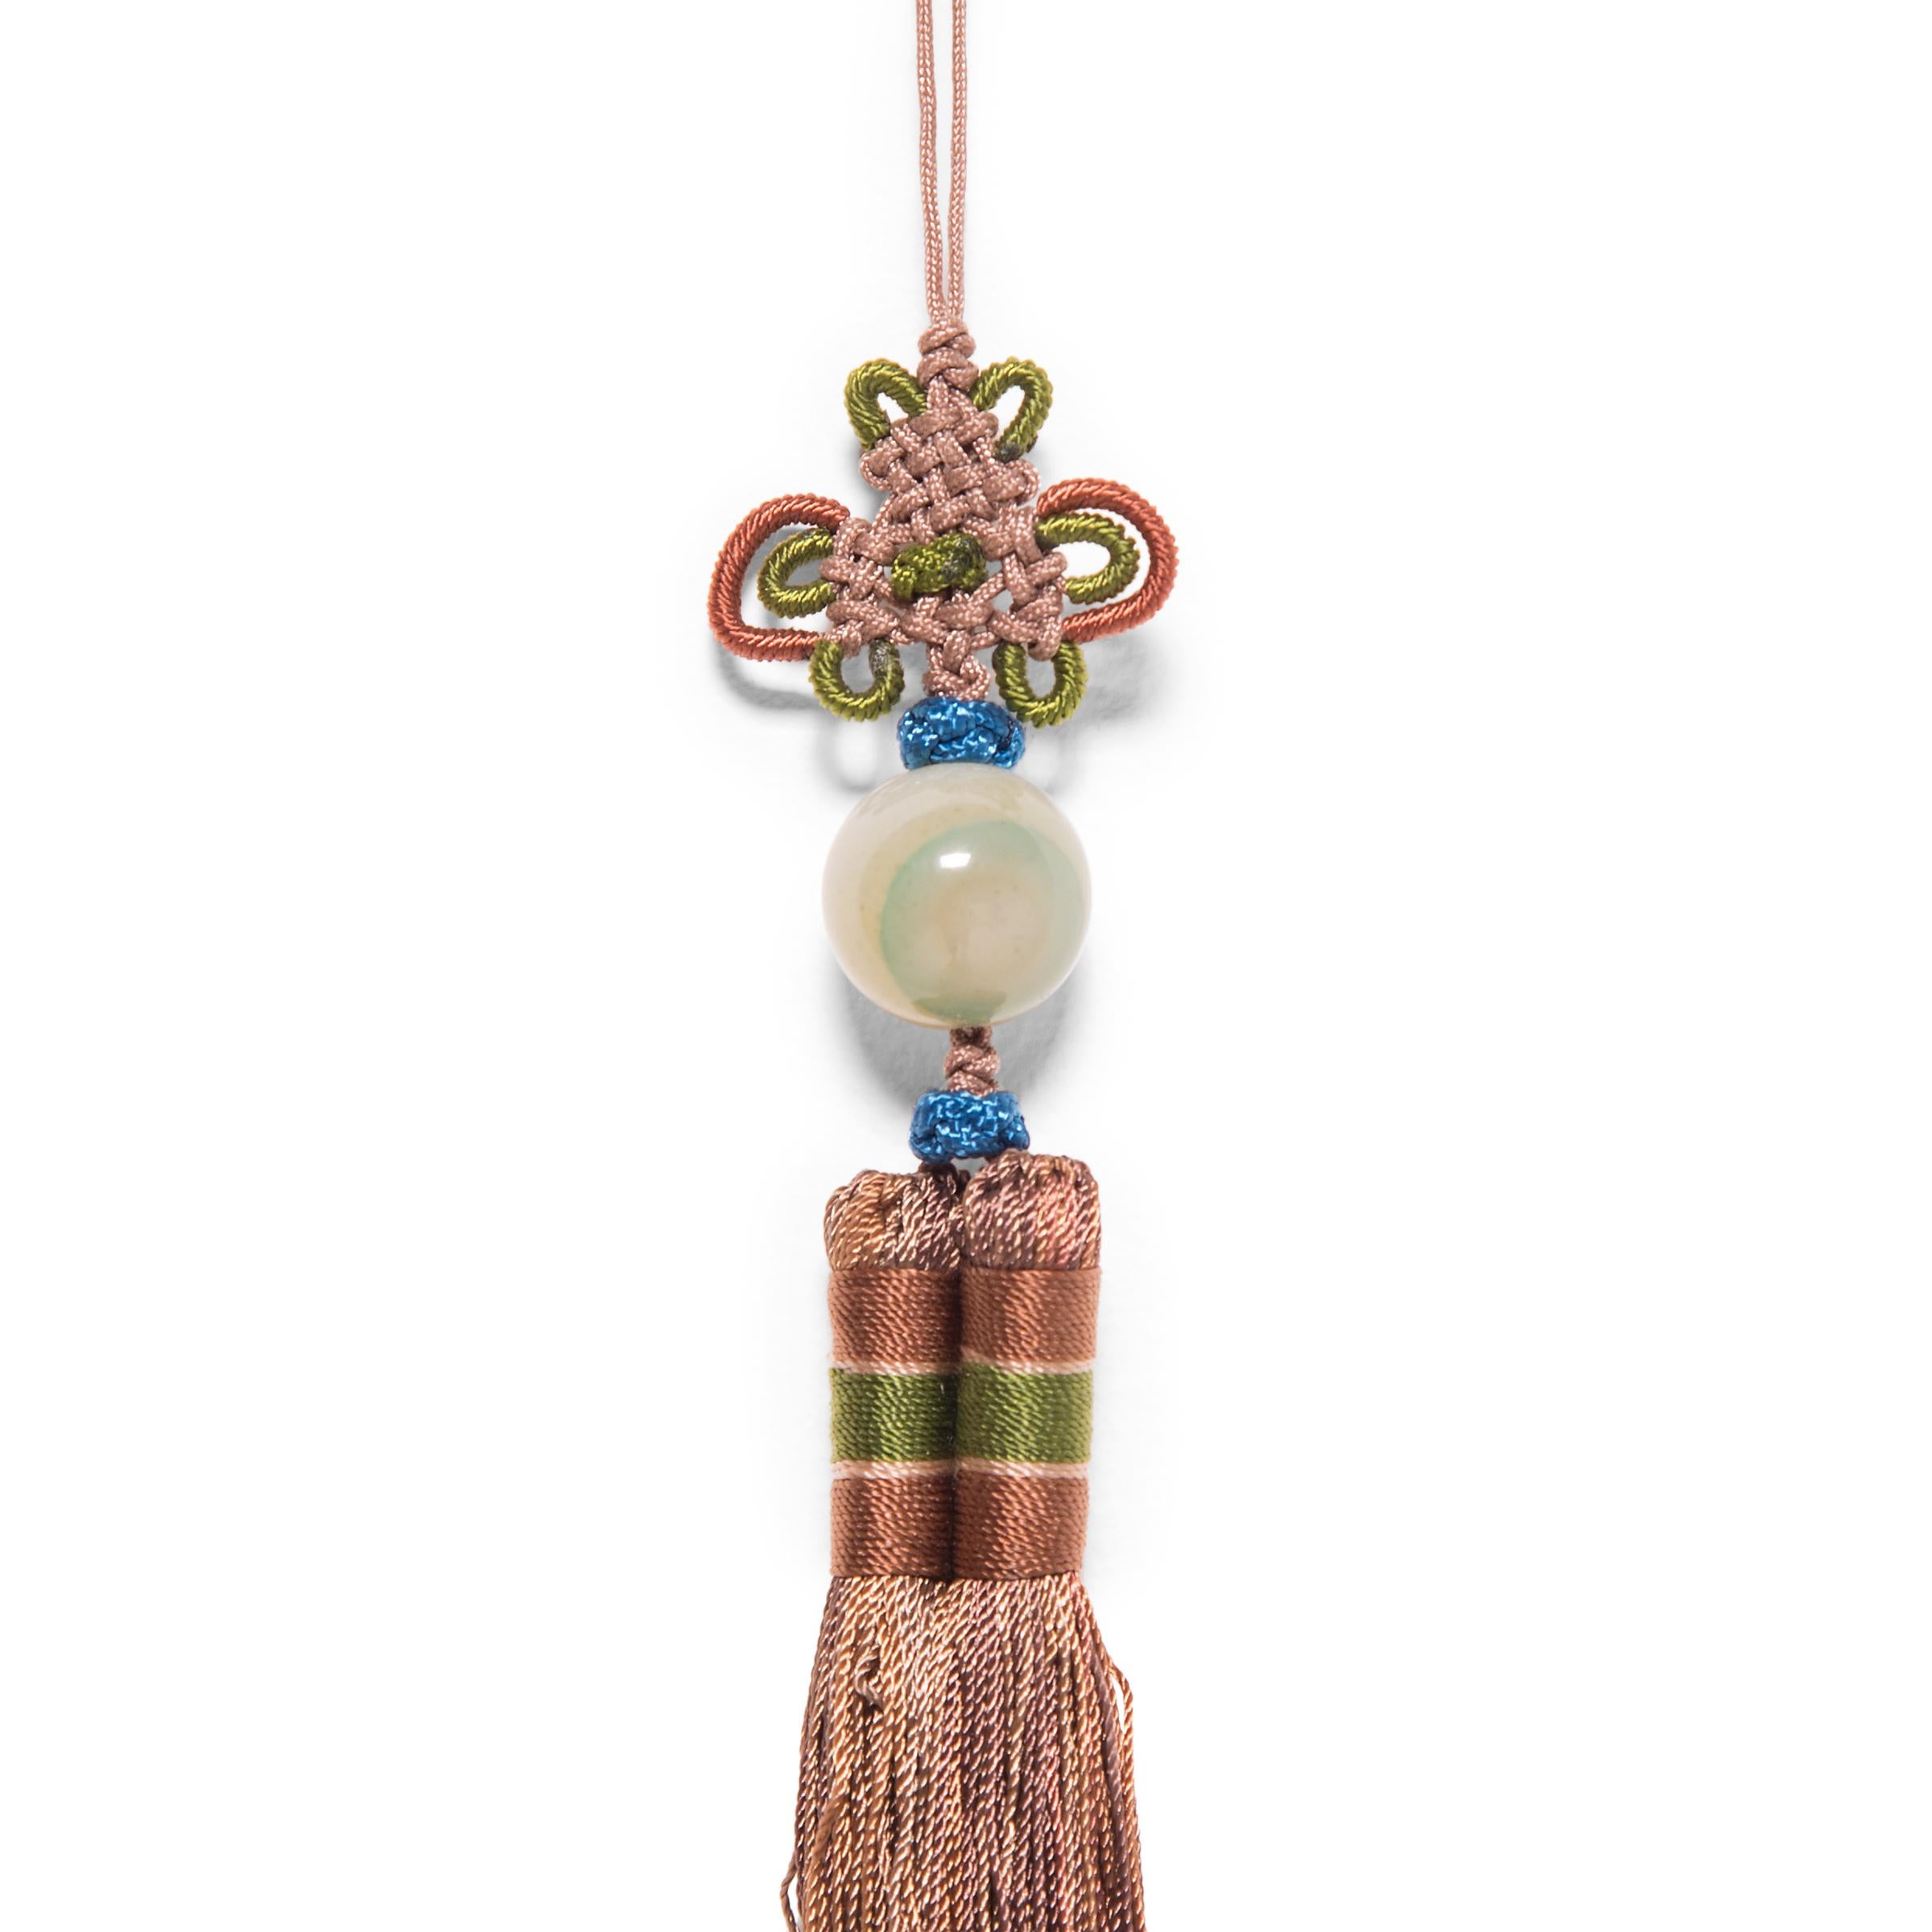 Chinese knotted tassels are used to add elegance to everyday items and bring good fortune wherever they're placed. Fine tassels hold sentimental value, and are often passed down through generations or gifted as a token of one's love.

This small